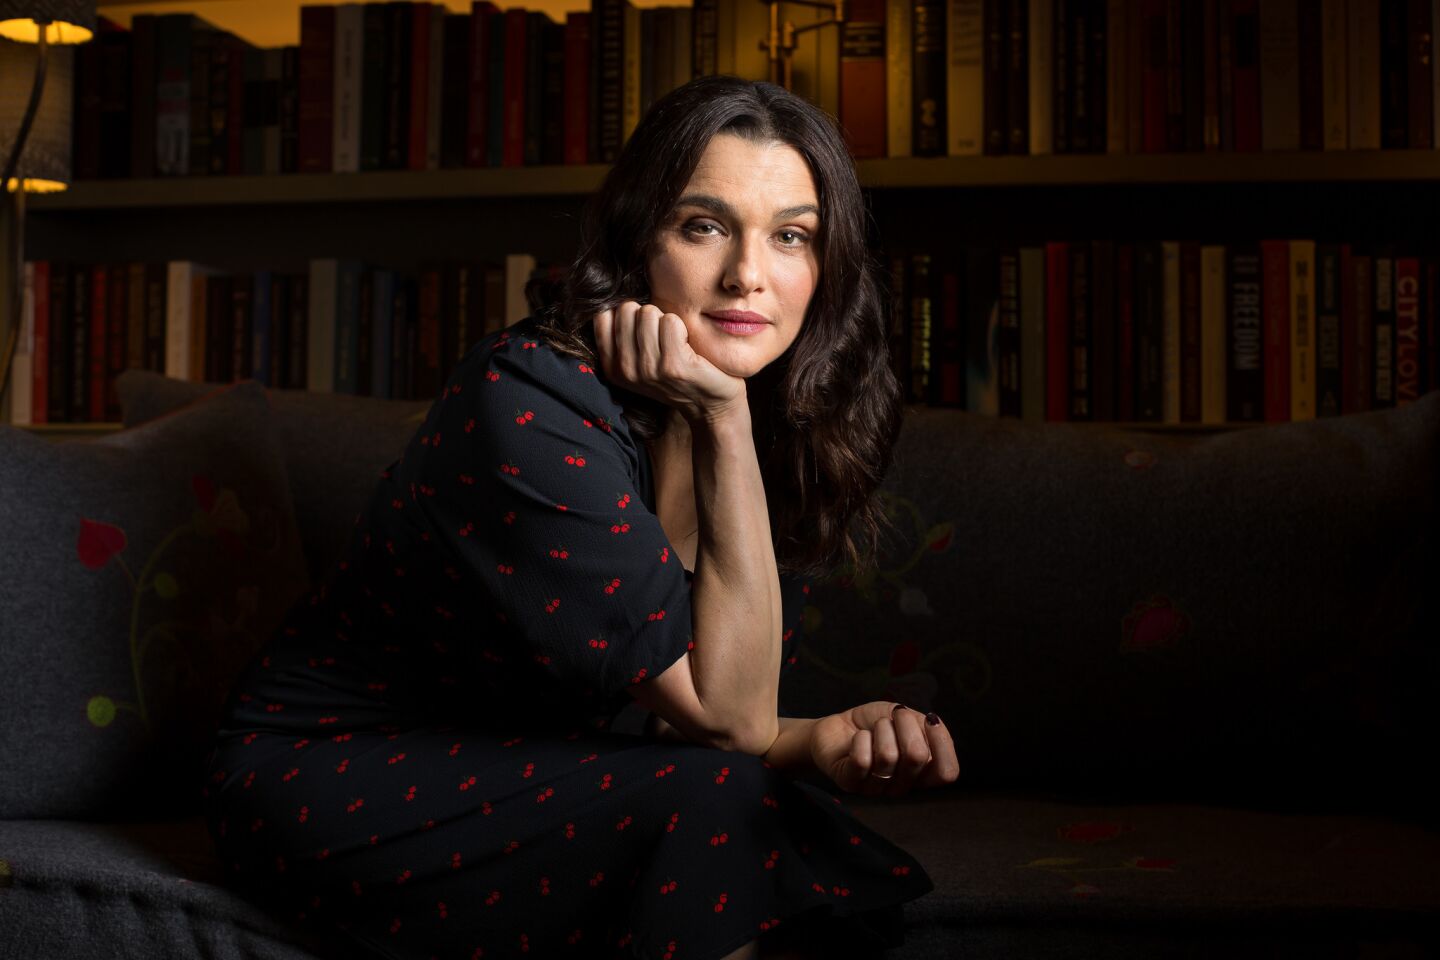 Rachel Weisz is currently undefeated in this category, having won the award on her sole previous nomination, for “The Constant Gardener” in 2006. Like costar Emma Stone, she also has received SAG, BAFTA and Golden Globe nominations. They are the first duo from the same film nominated in this category since Jessica Chastain and Octavia Spencer of “The Help” in 2011.